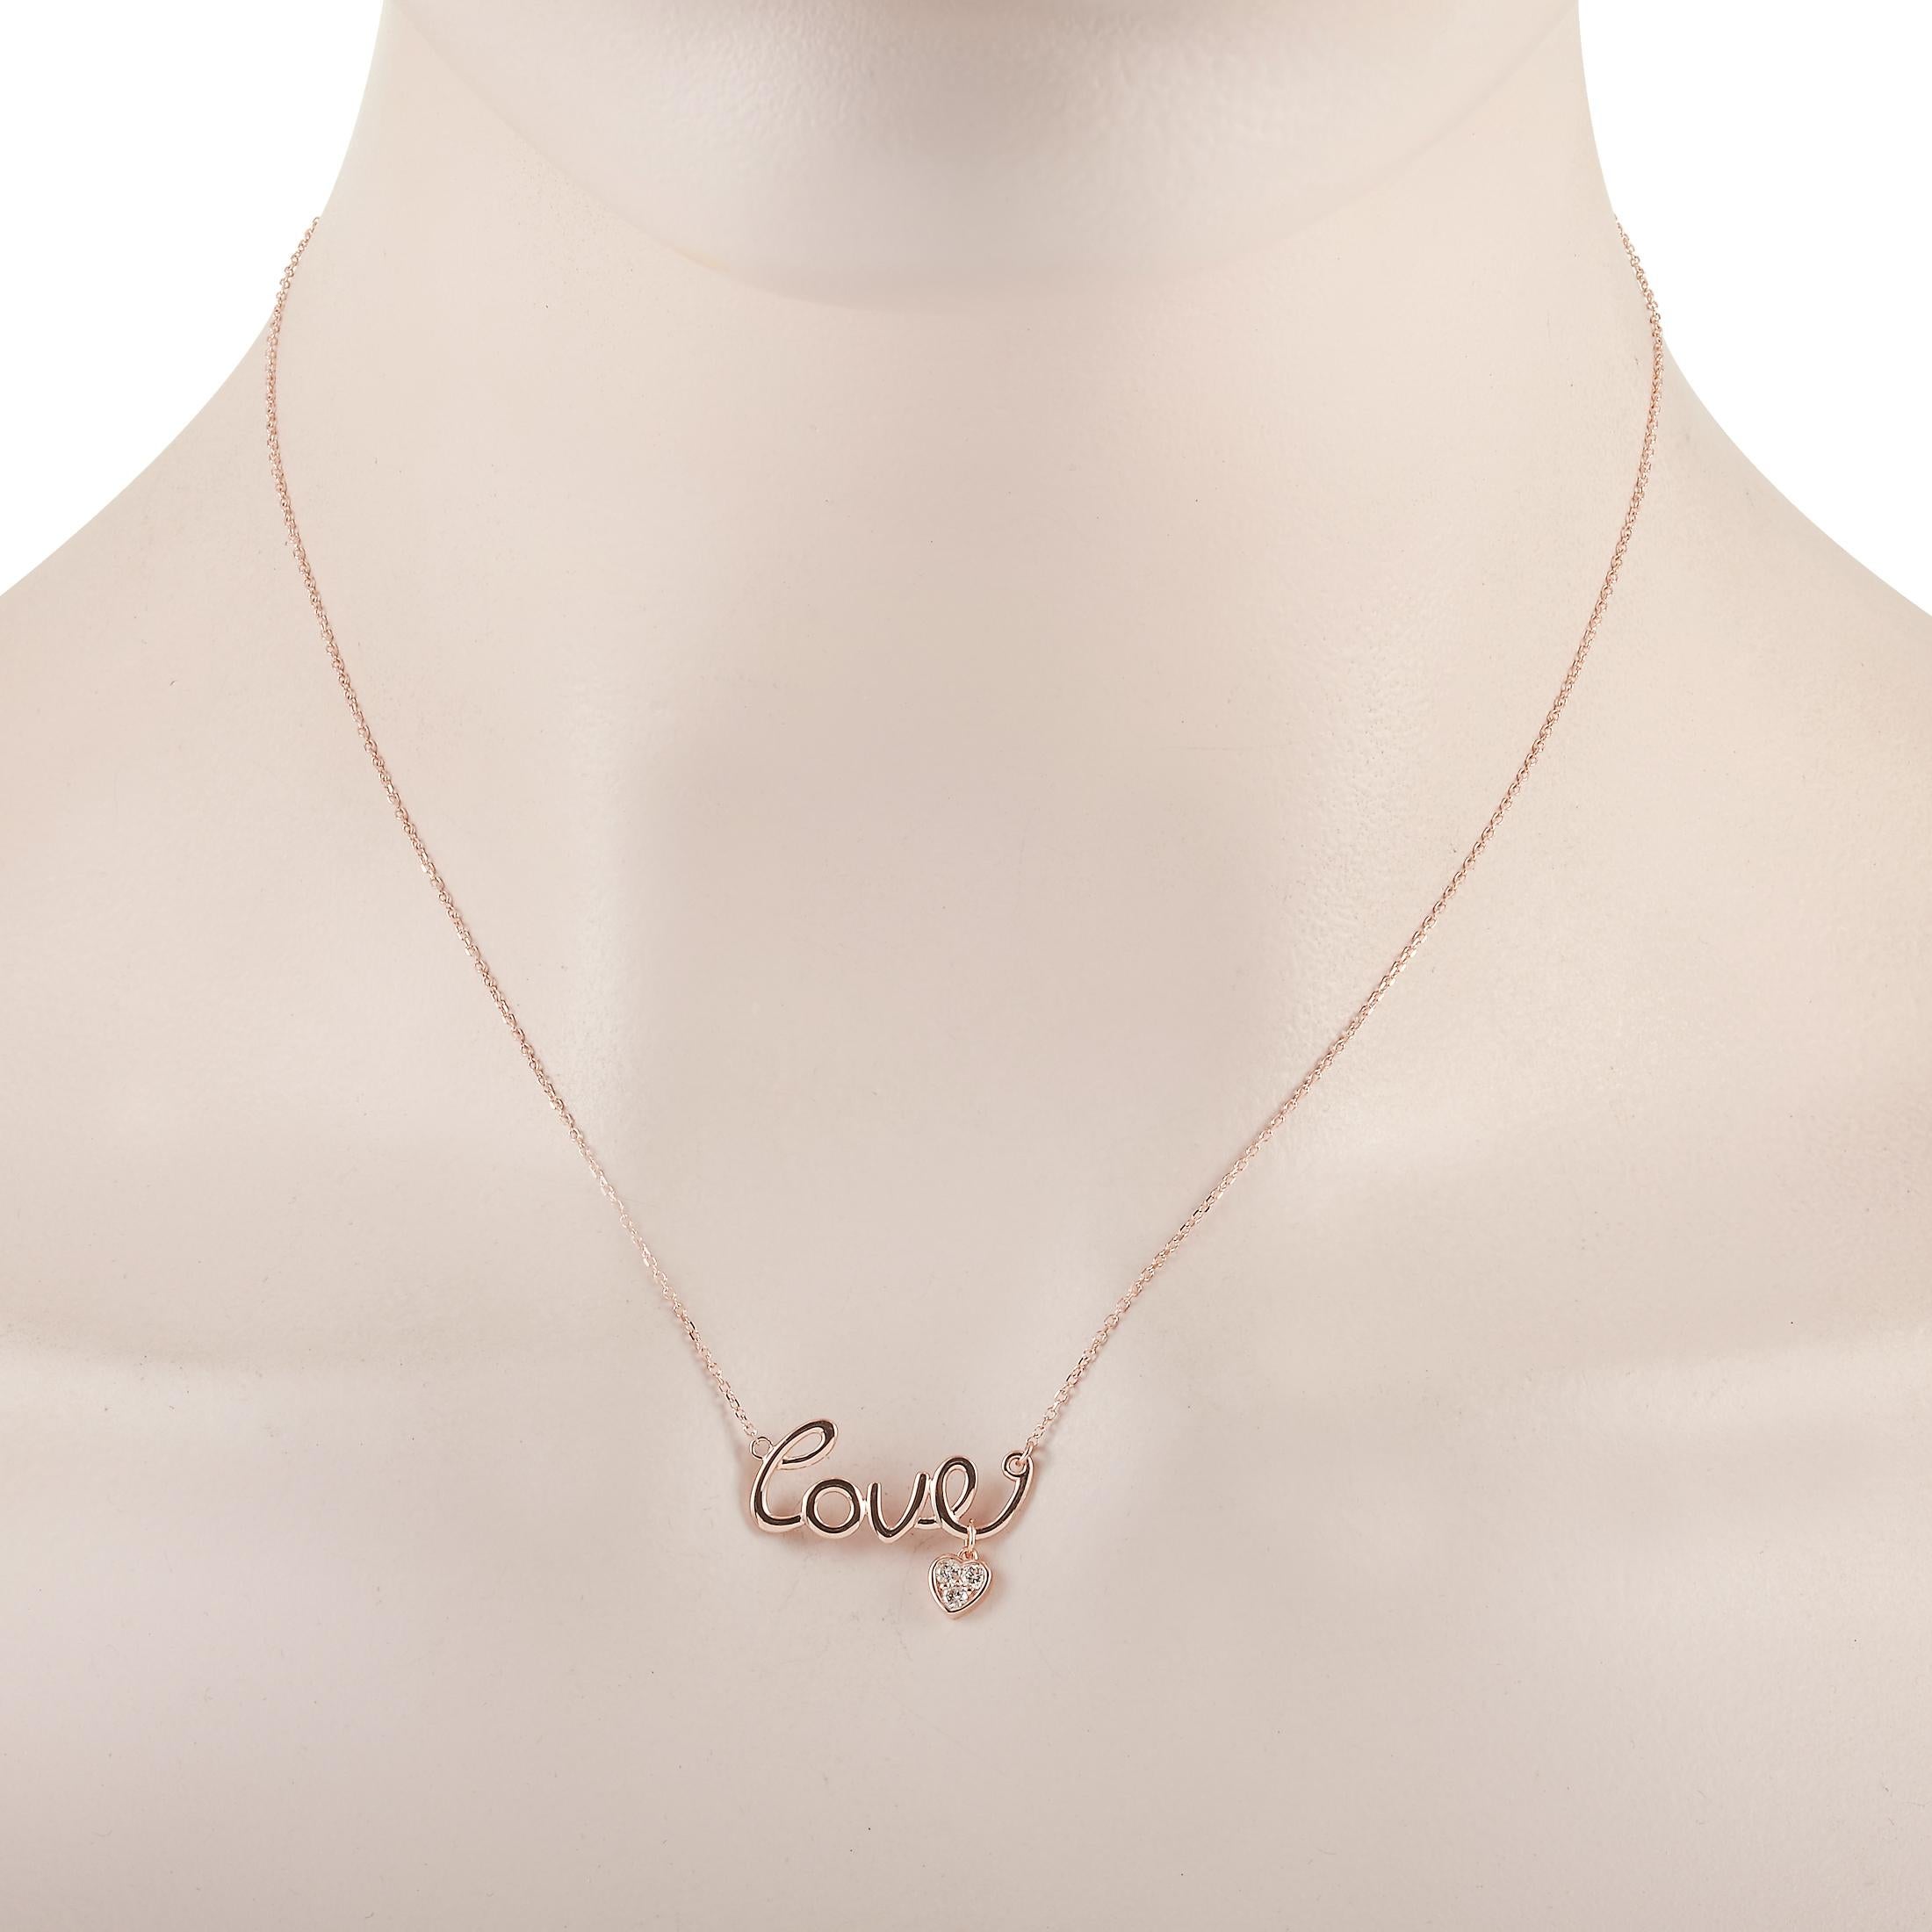 This LB Exclusive necklace is crafted from 14K rose gold and weighs 2.4 grams. It is presented with a 15” chain and boasts a love pendant that measures 0.50” in length and 1” in width. The necklace is set with diamonds that total 0.10 carats.
 
